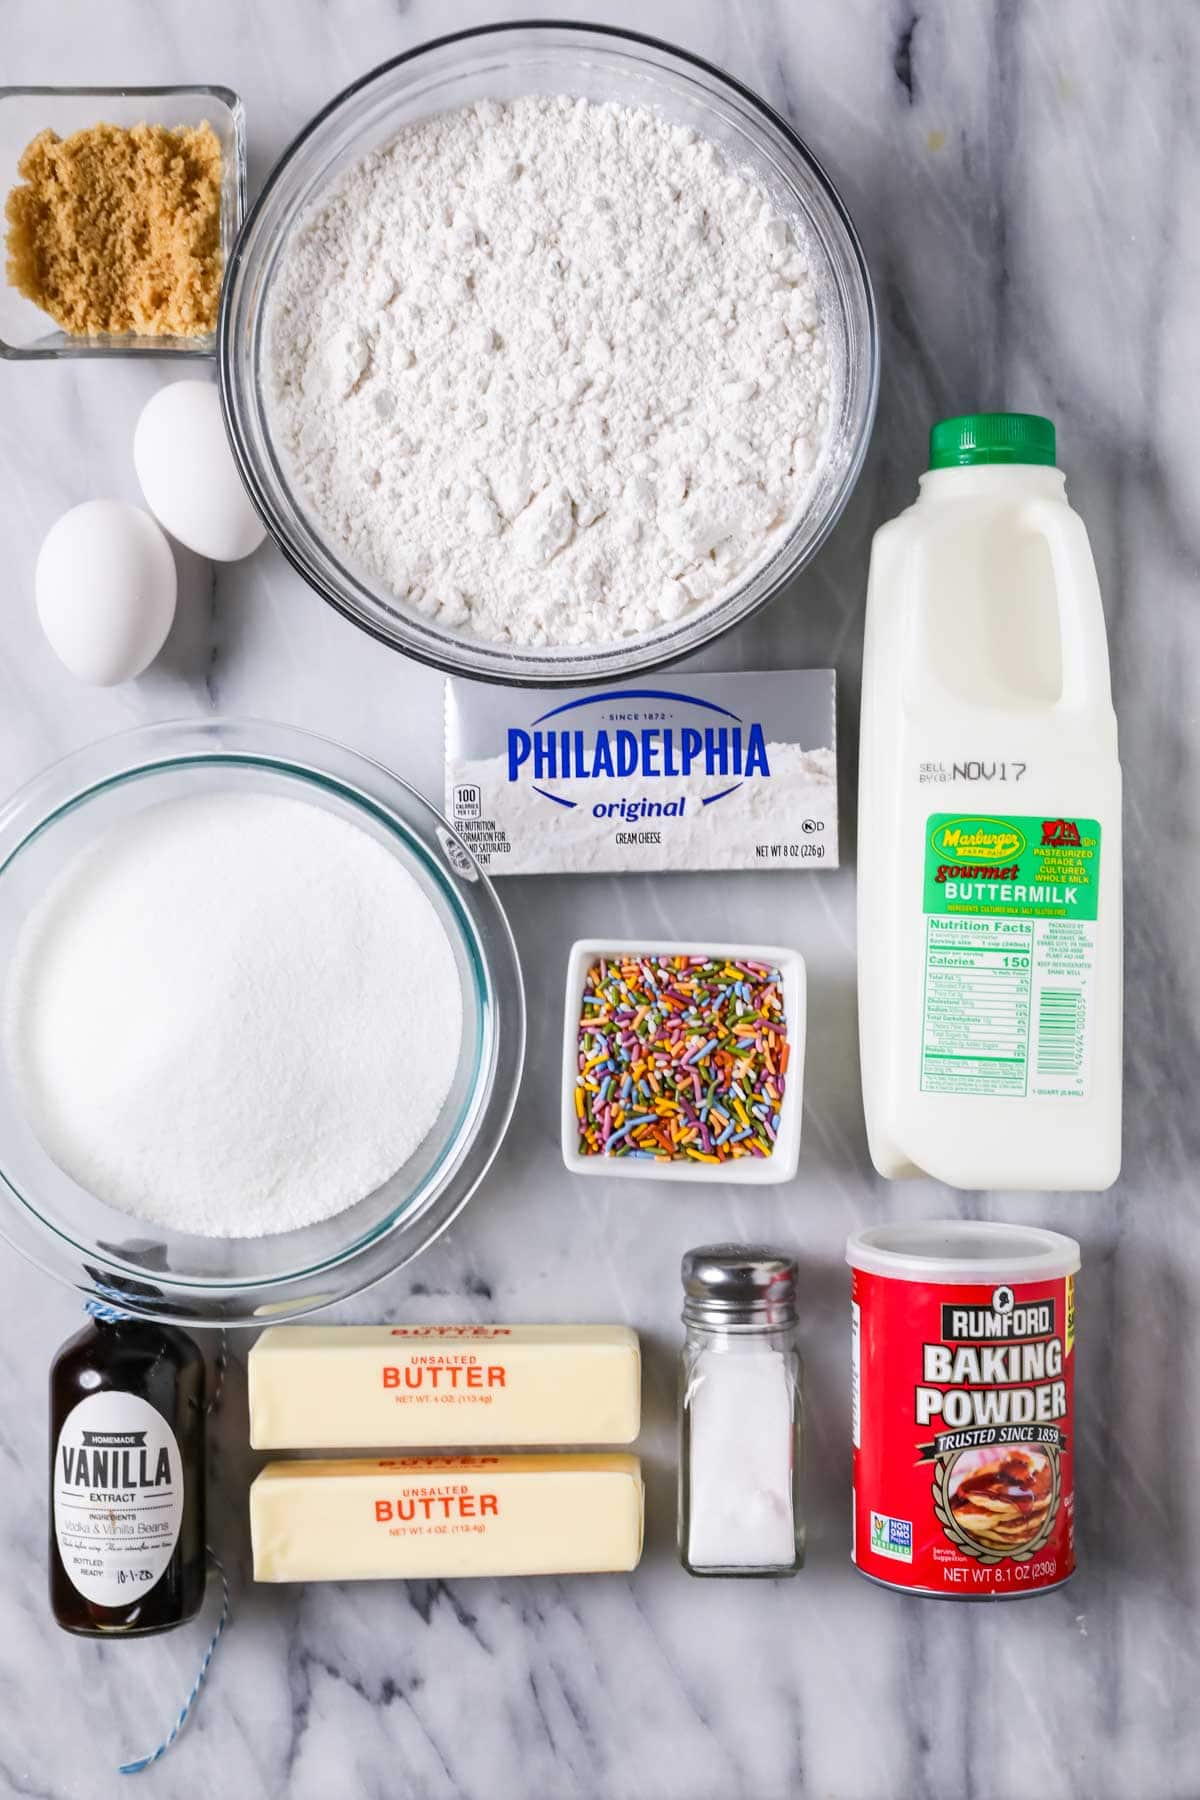 Overhead view of ingredients including buttermilk, sprinkles, cake flour, cream cheese, and more.